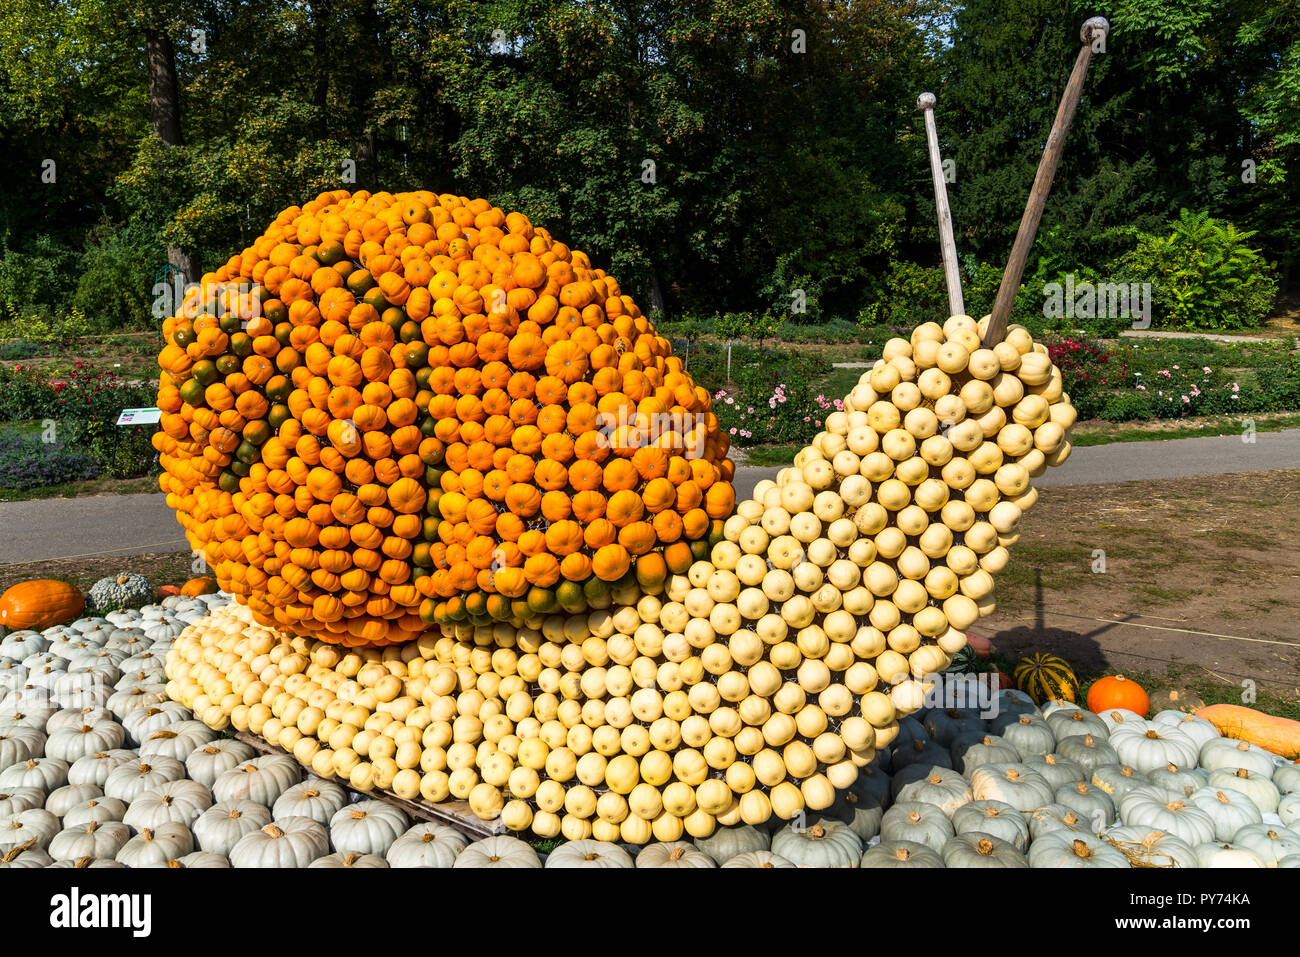 Pumpkins arranged in animal forms. A snail figure made of pumpkin. Pumpkin festival in Ludwigsburg, Germany. September 2018 Stock Photo